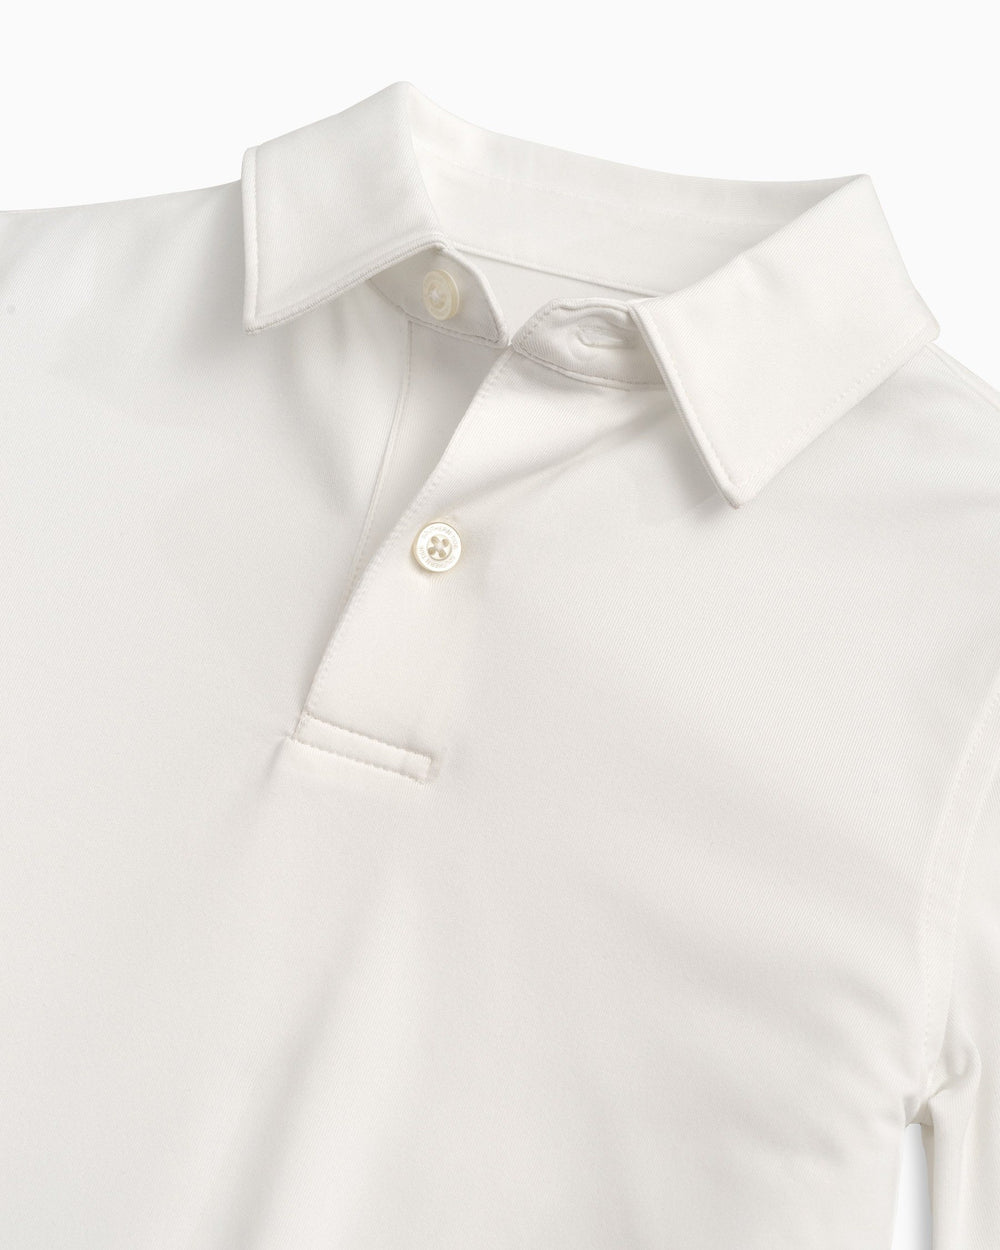 The detail view of the Boys Driver Performance Polo Shirt by Southern Tide - Classic White